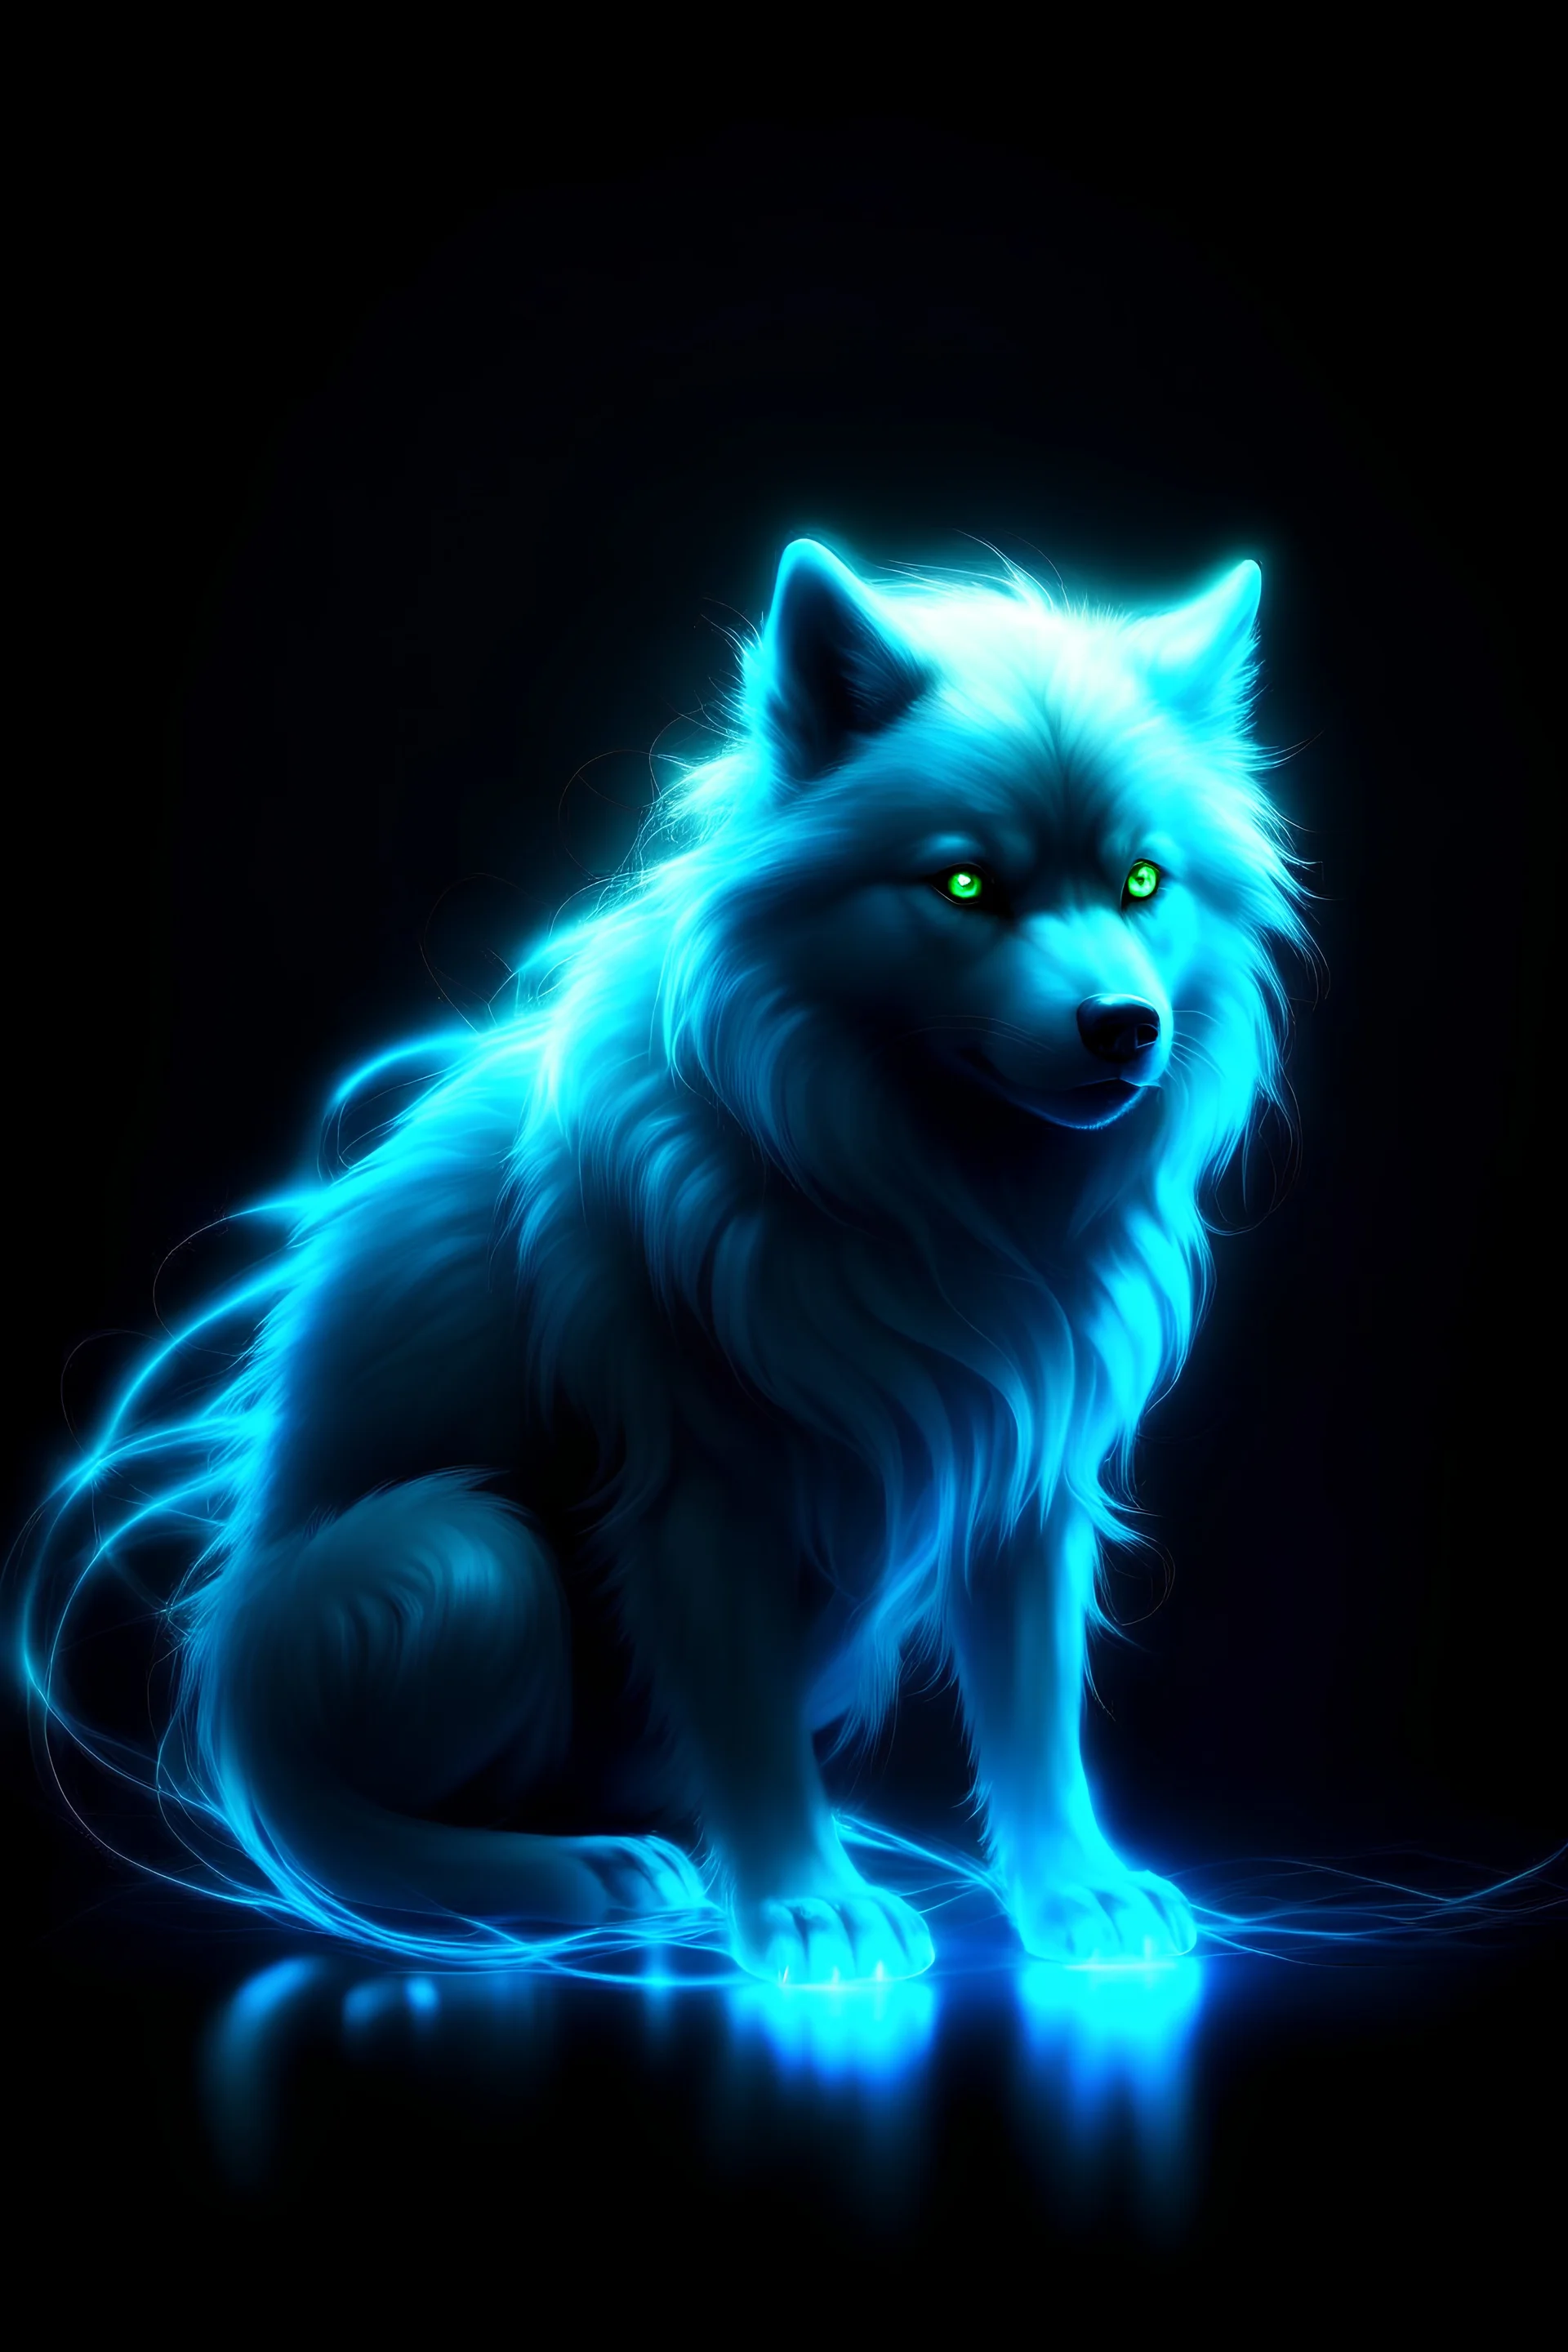 Super cool glowing ghostly canine with mencaing glowing eyes In a dark room. It sits alone staring straightly and deeply at us, it has a painted-anime style.